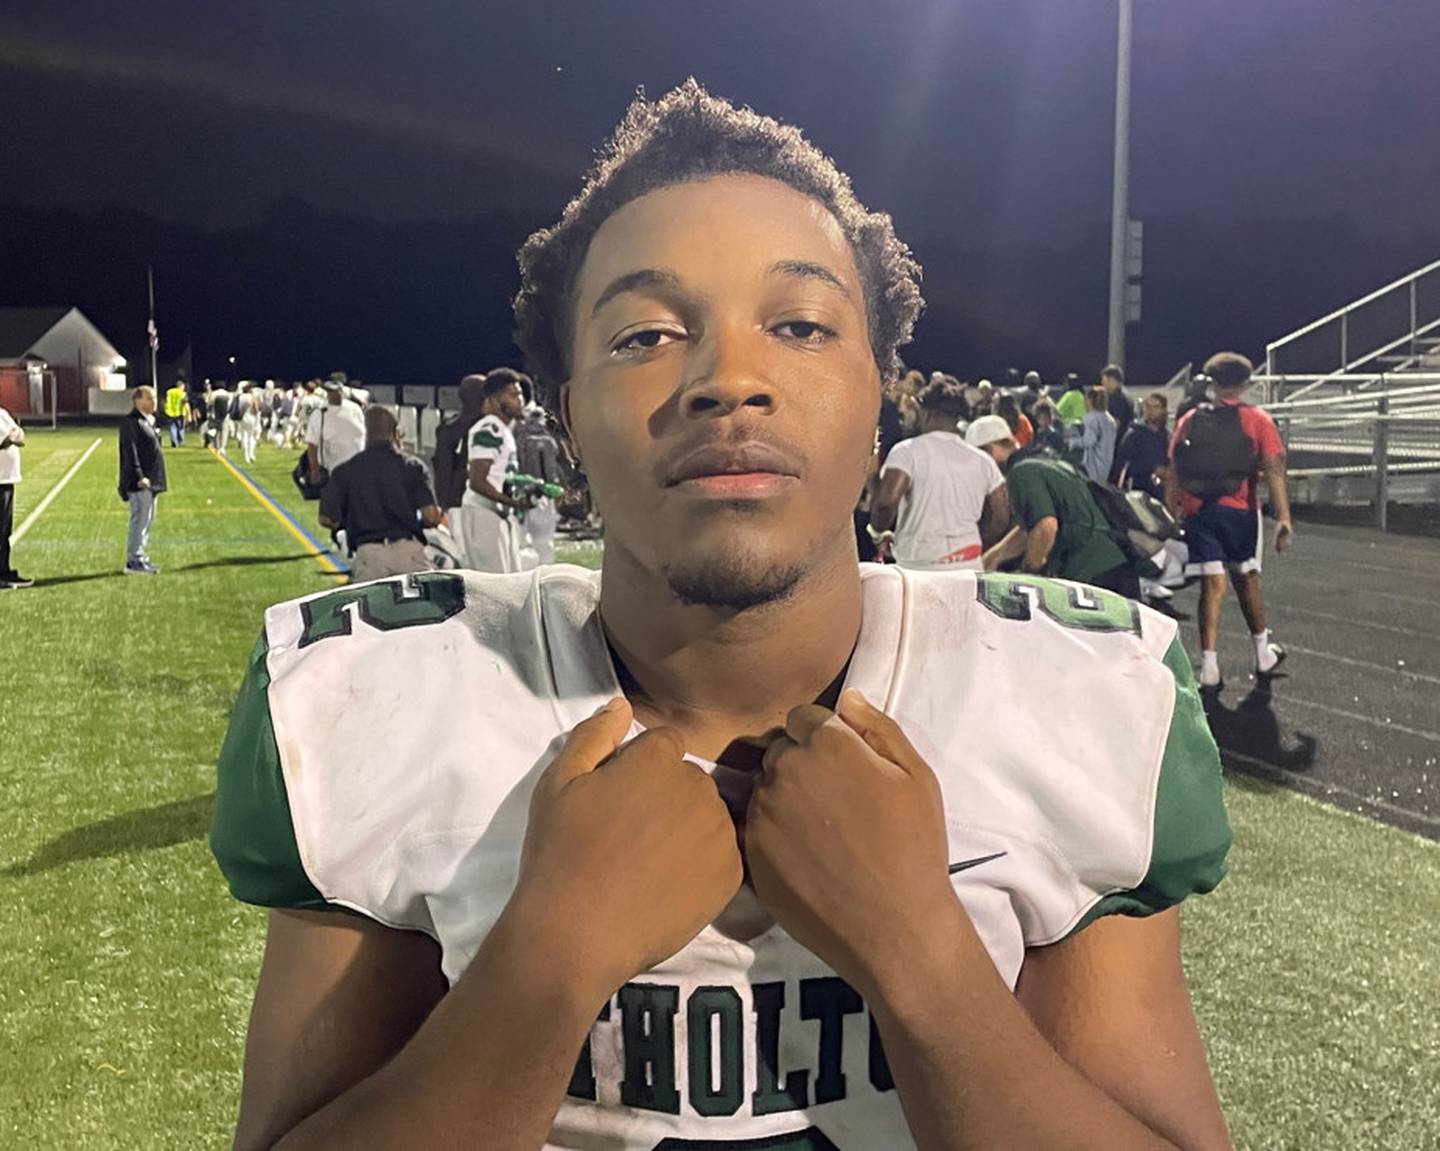 Atholton's Dillan Watkins rushed for a career high 242 yards and two touchdowns, including the game-clinching score in the fourth quarter, as the 14th-ranked Raiders defeated Glenelg, 21-7, in Howard County football action.